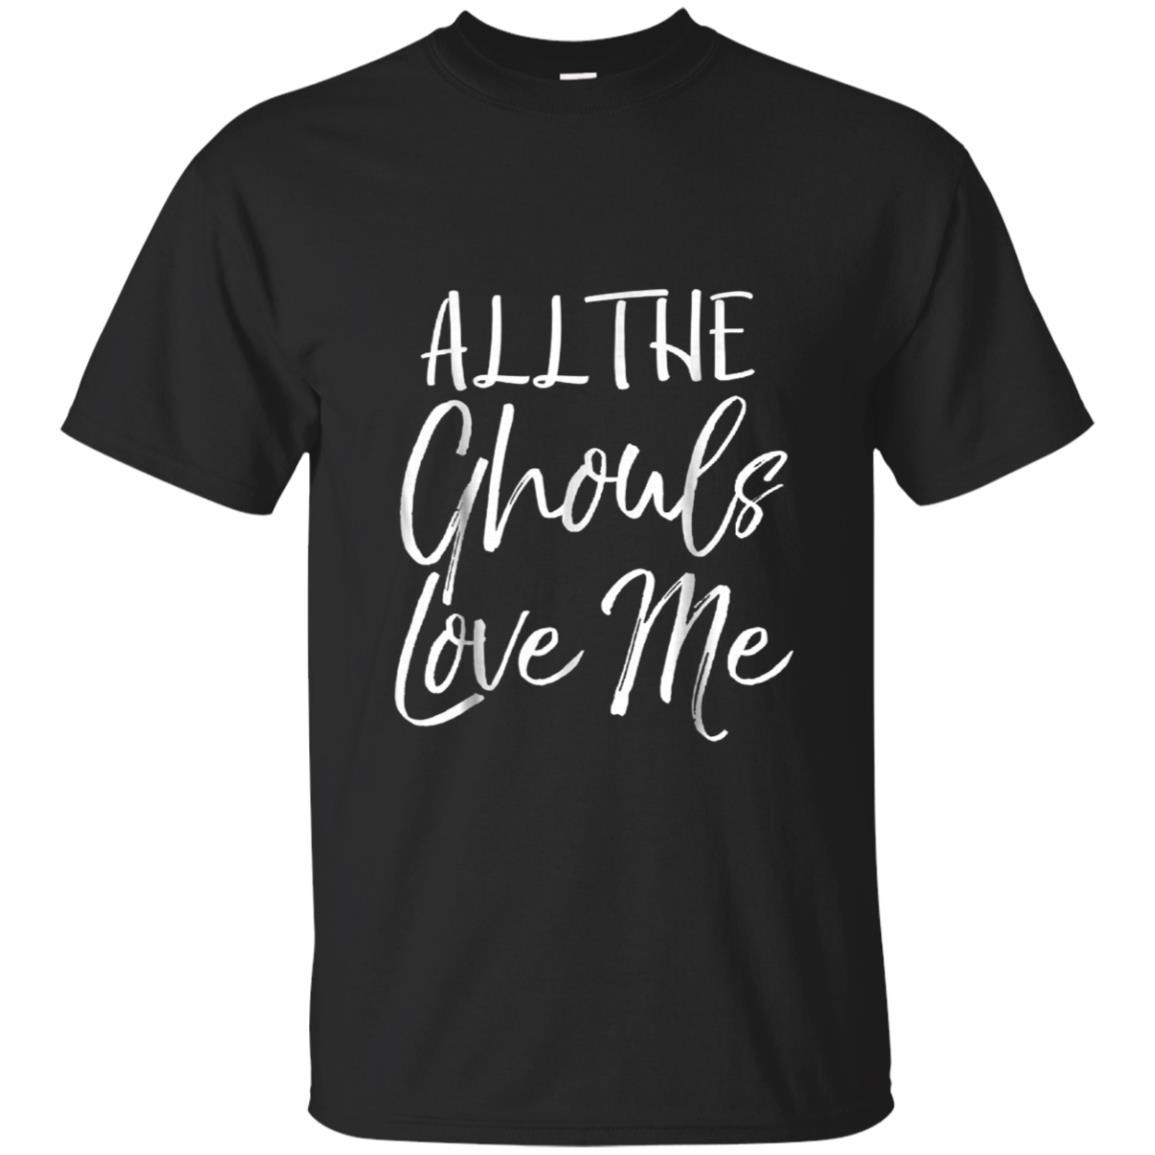 All The Ghouls Love Me Shirt Funny Ghost Pun Halloween Tee